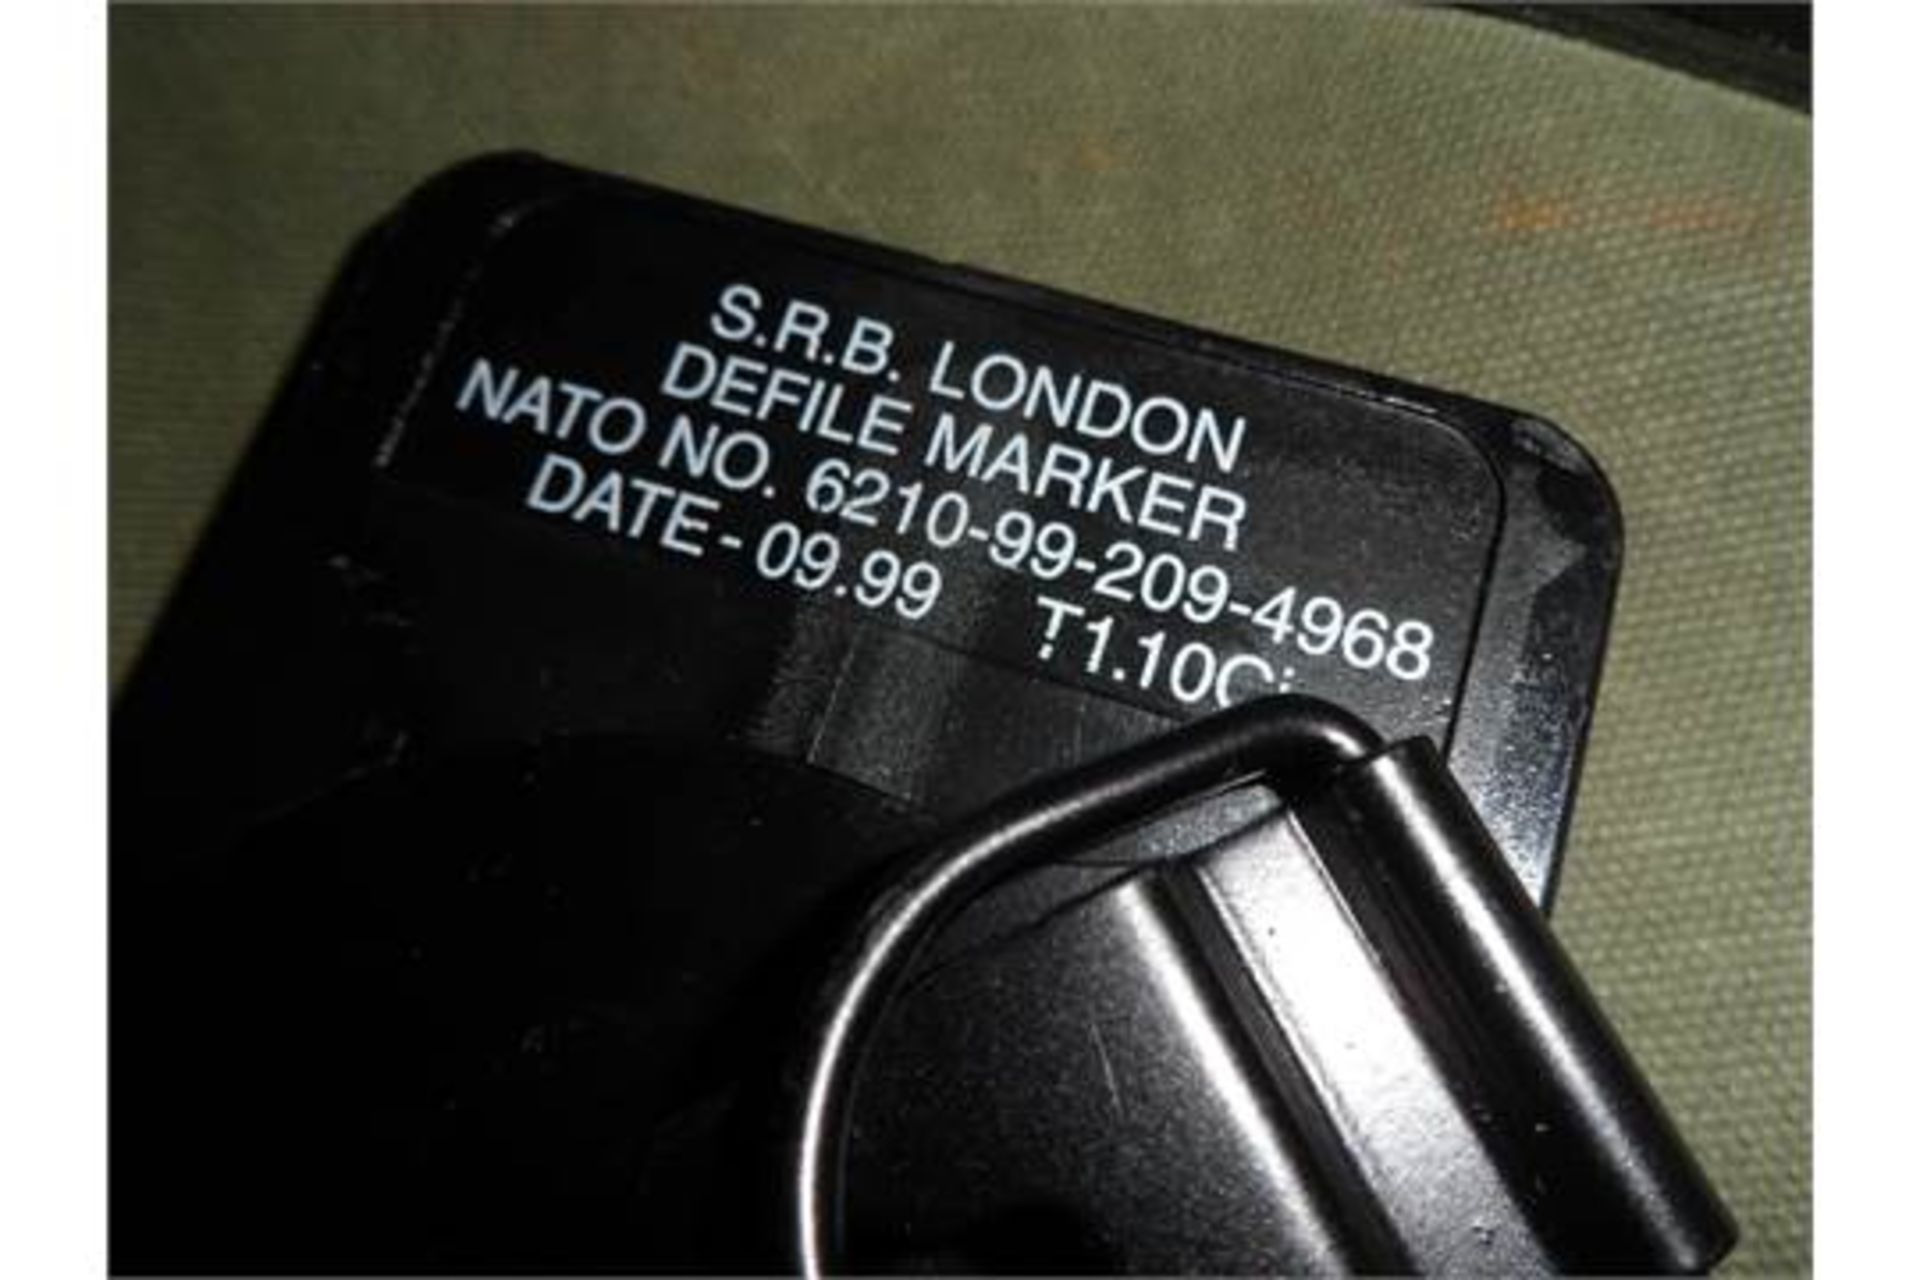 10 x Very Rare British Army Glow In The Dark Route Markers - Image 4 of 4